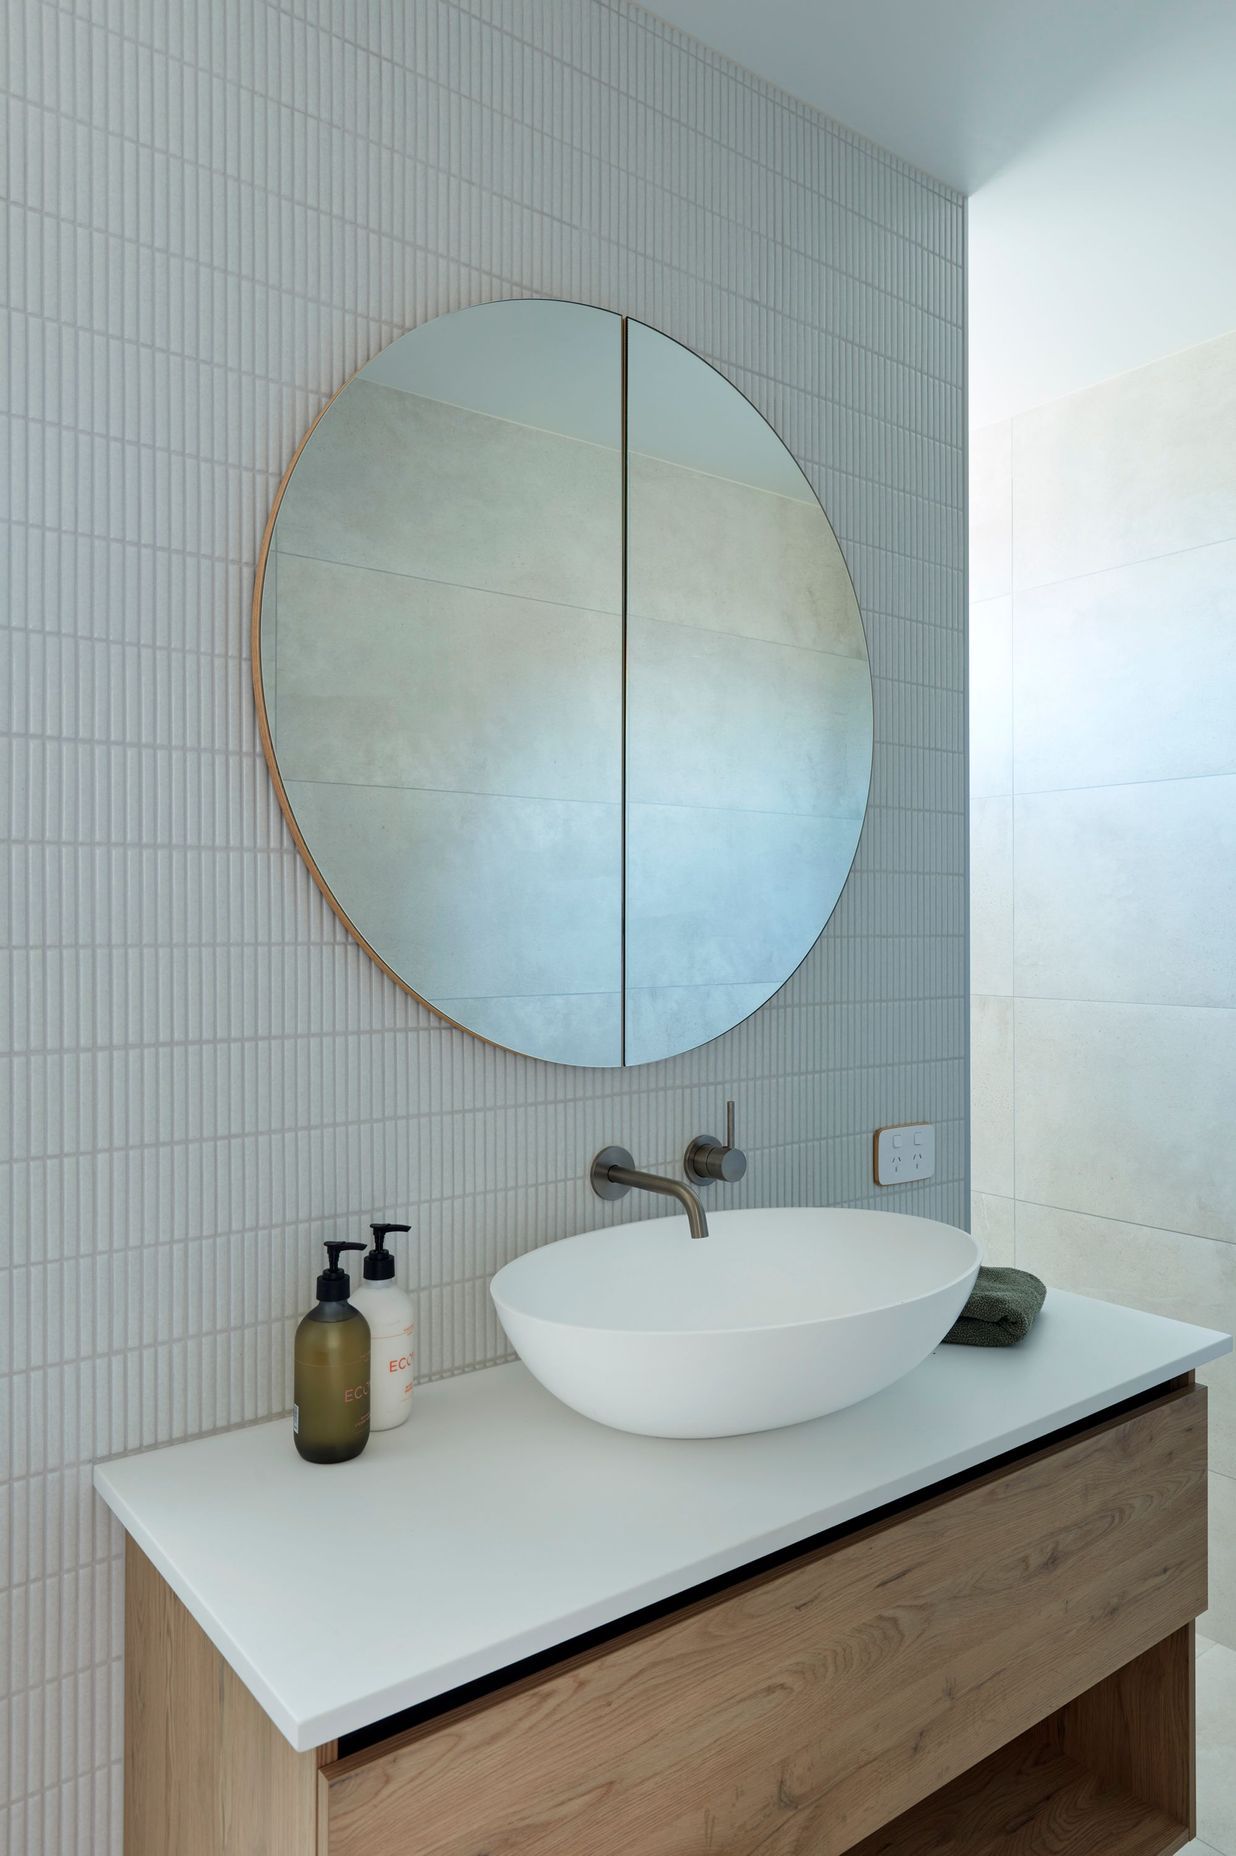 The owners chose a Progetto Vista mirror cabinet as a statement piece in the ensuite. It is mounted on a wall of glossy Yubi Sake finger mosaics above an Odessa Urban vessel basin. Elementi Uno tapware in brushed nickel is a finishing touch.